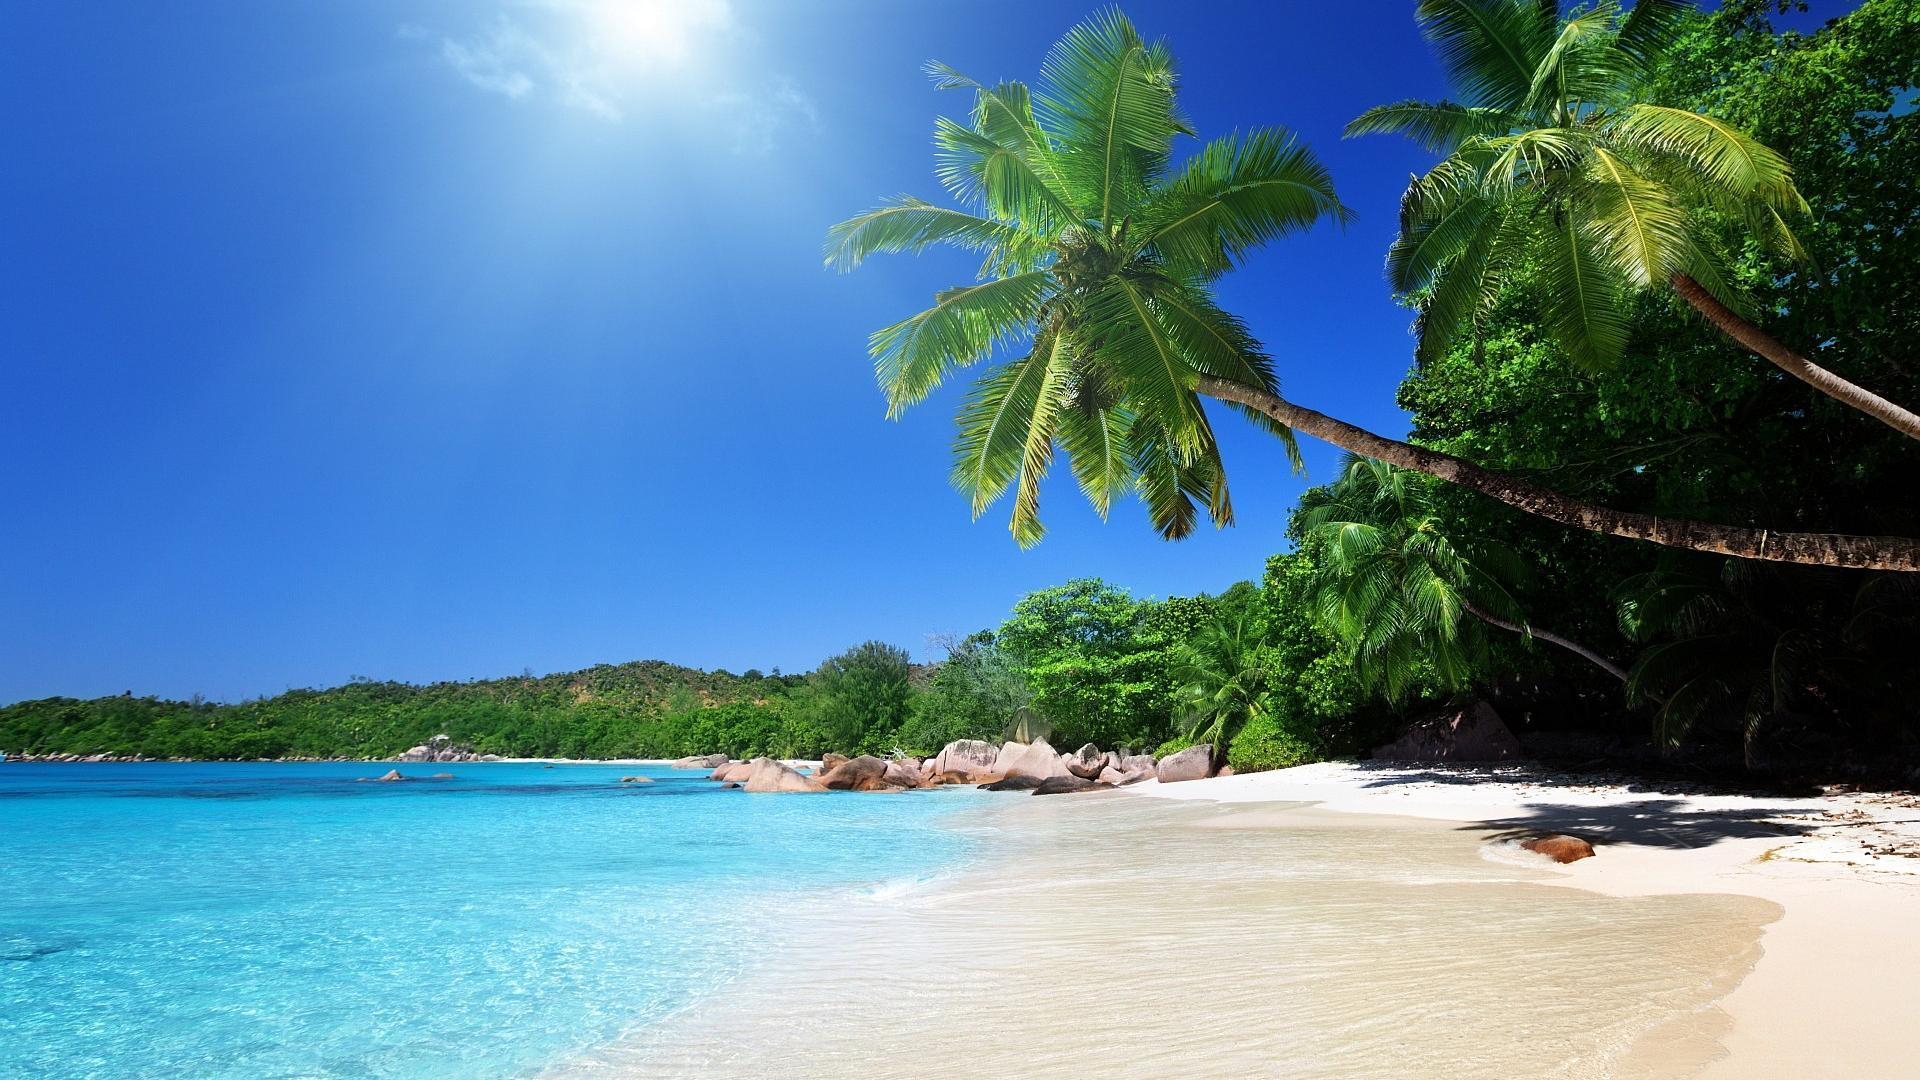 1920x1080 Tropical Beach Scenery Wallpapers Top Free Tropical Beach Scenery Backgrounds